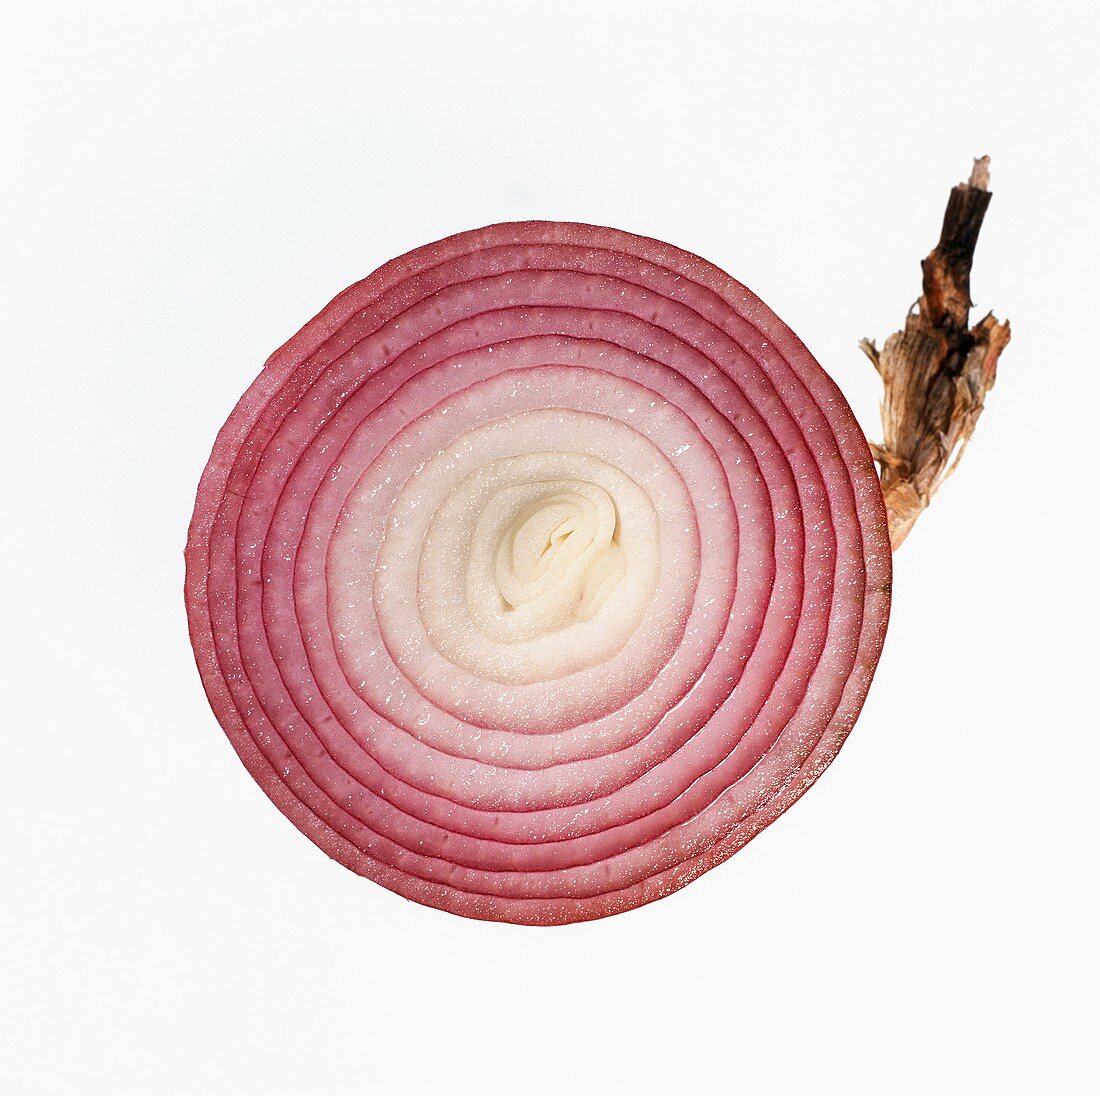 Red Onion Slice on White Background